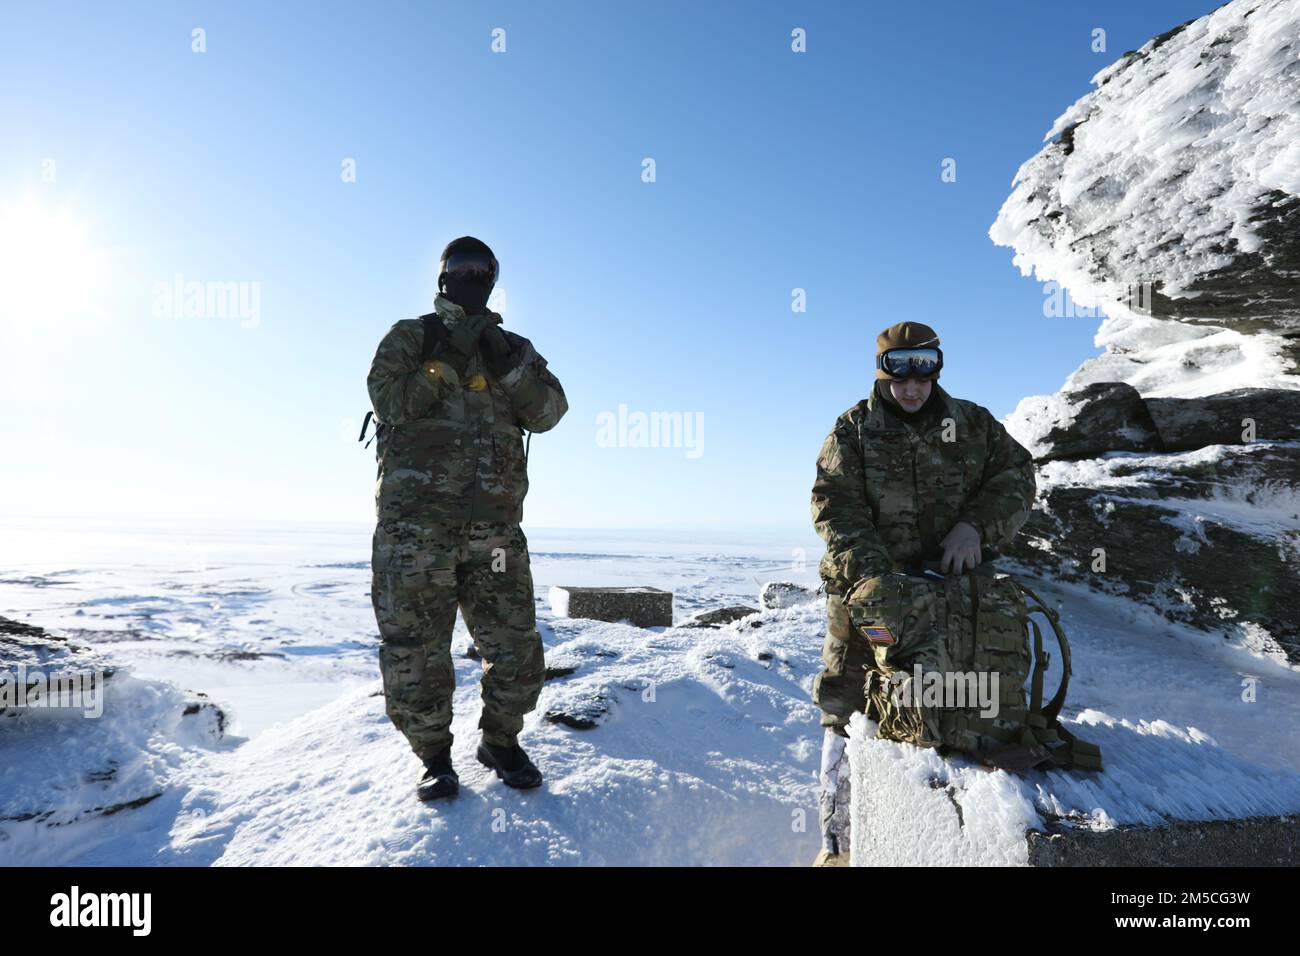 Pvt. Stanley Rodeski (left) and Pvt. Benjamin Glenn, service members with the Alaska State Defense Force, survey the outskirts of Nome for a domain awareness exercise, Mar. 1. Alaska Exercise Arctic Eagle-Patriot 2022 increases the National Guard’s capacity to operate in austere, extreme cold-weather environments across Alaska and the Arctic region. AEP22 enhances the ability of military and civilian inter-agency partners to respond to a variety of emergency and homeland security missions across Alaska and the Arctic. Stock Photo